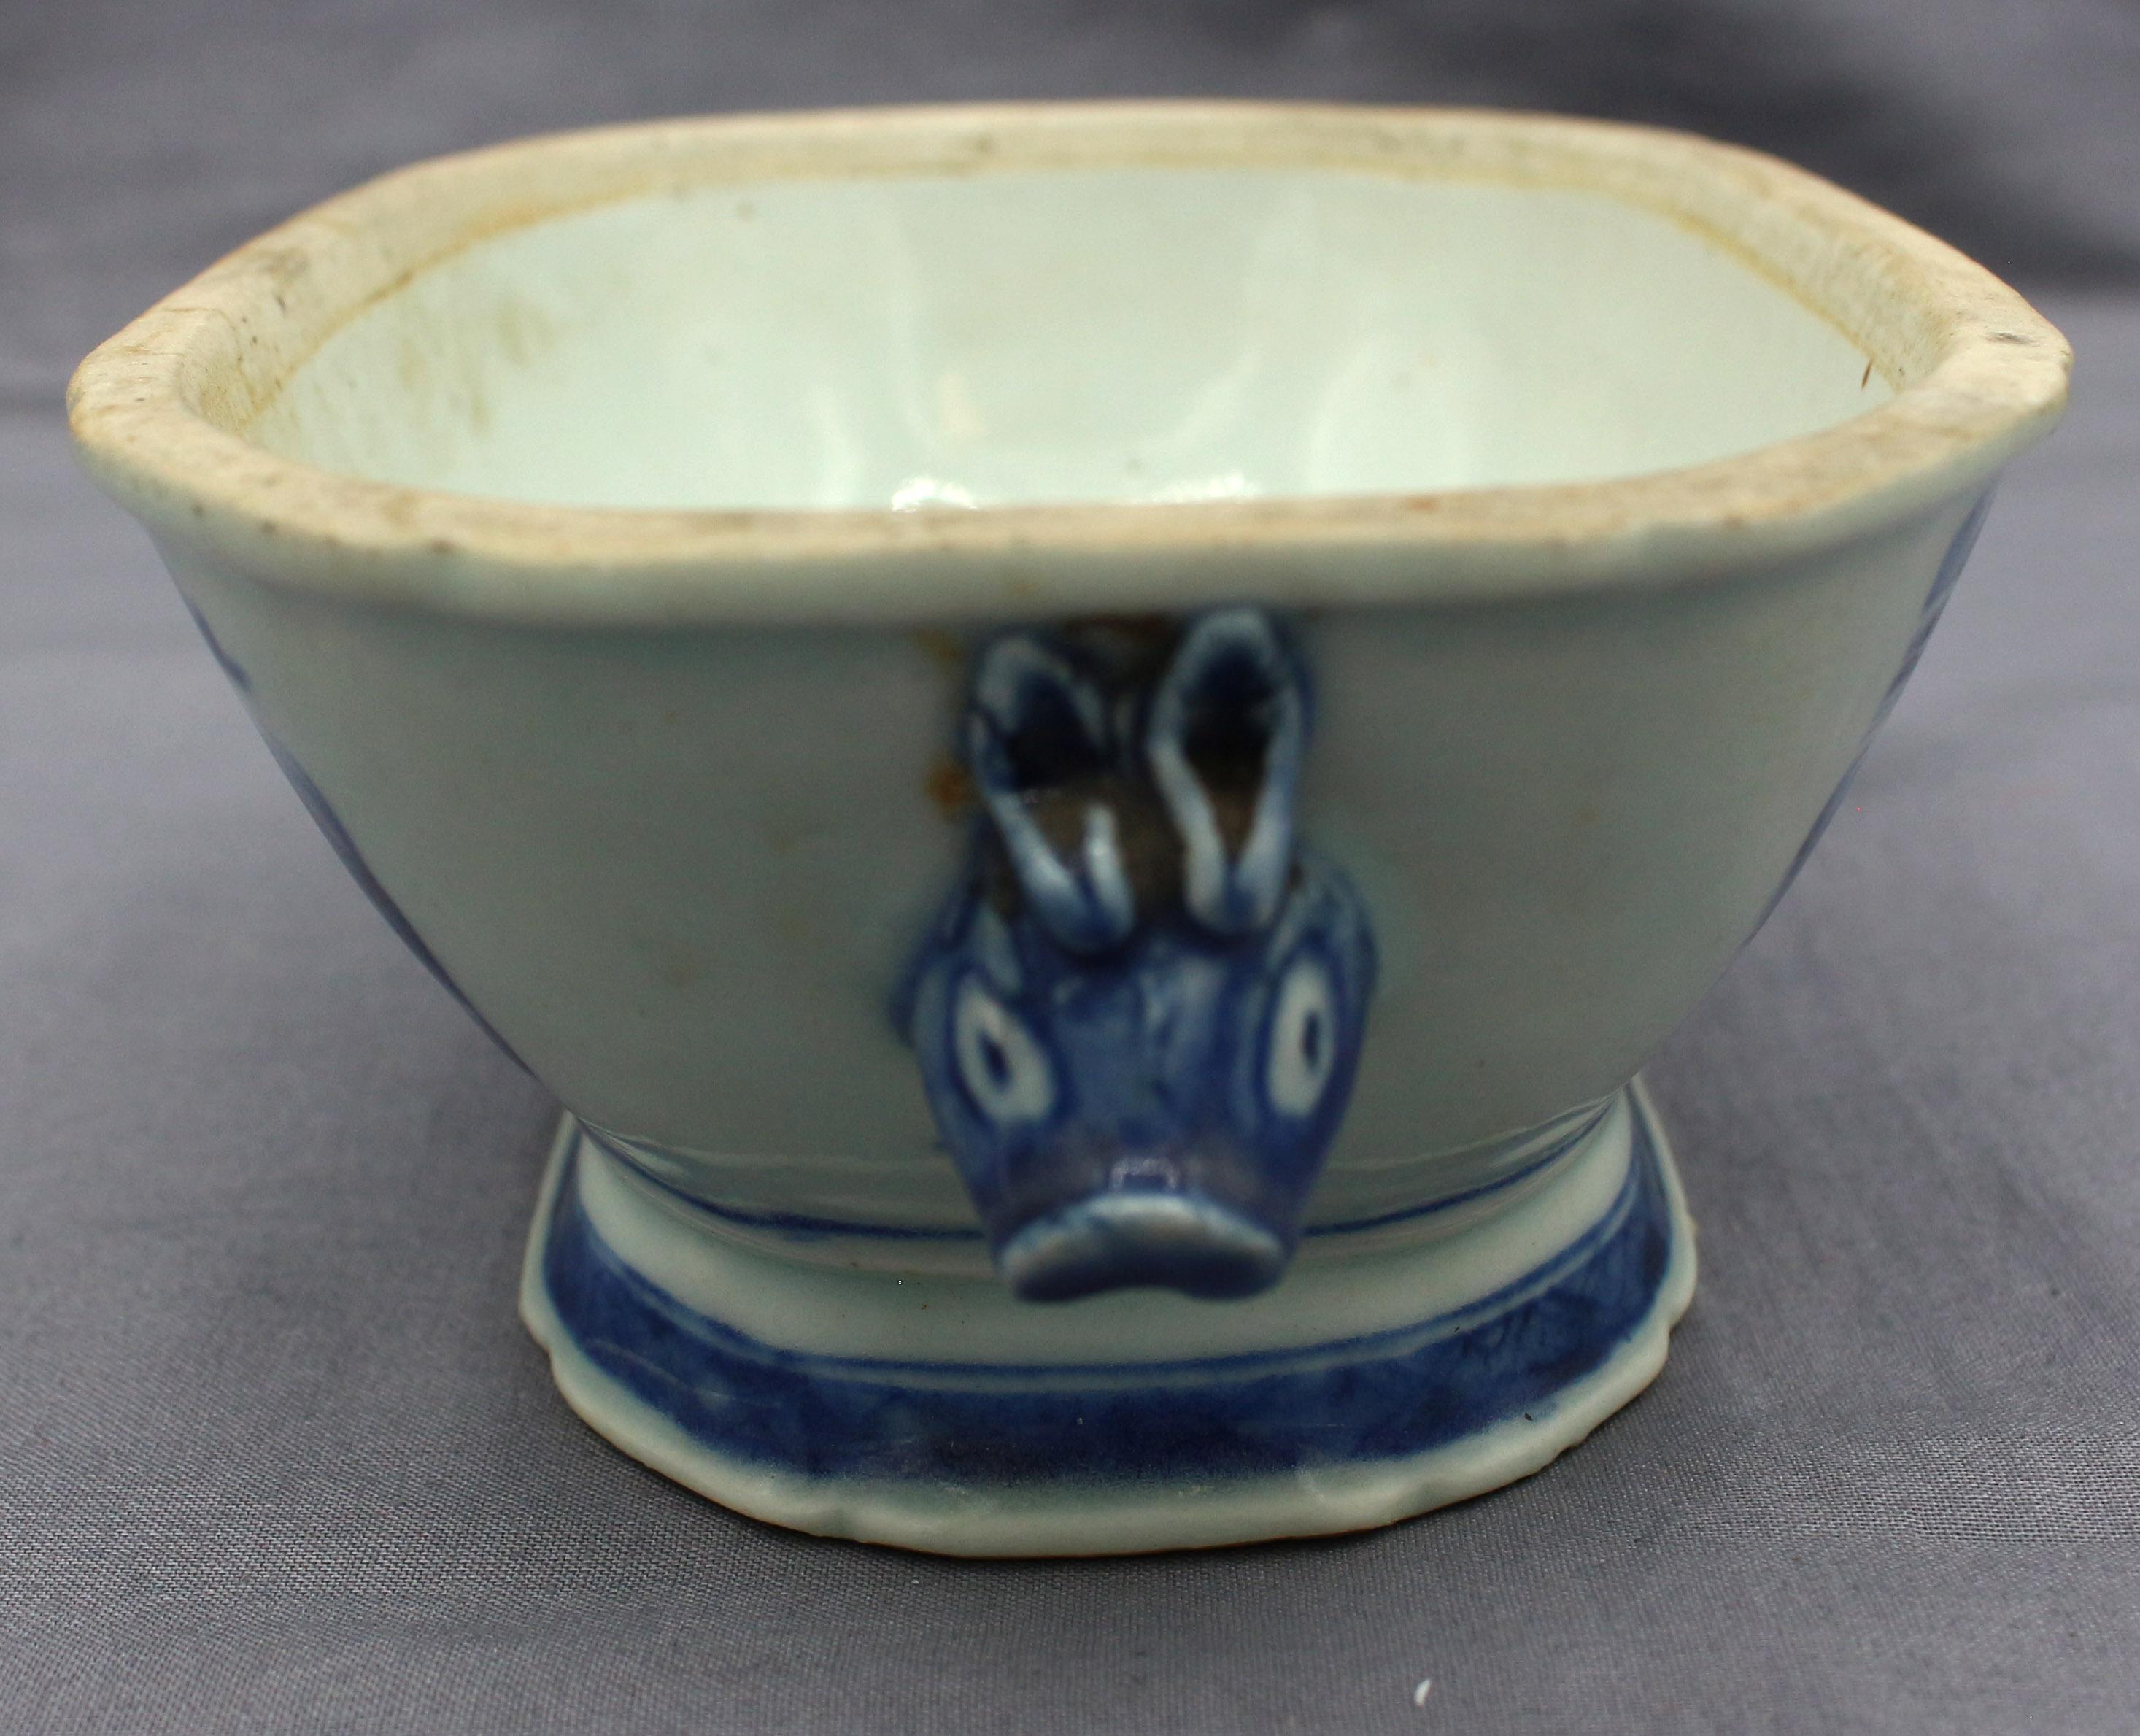 Ceramic Circa 1780-1800 Tureen with Associated Stand, Blue Canton, Chinese Export